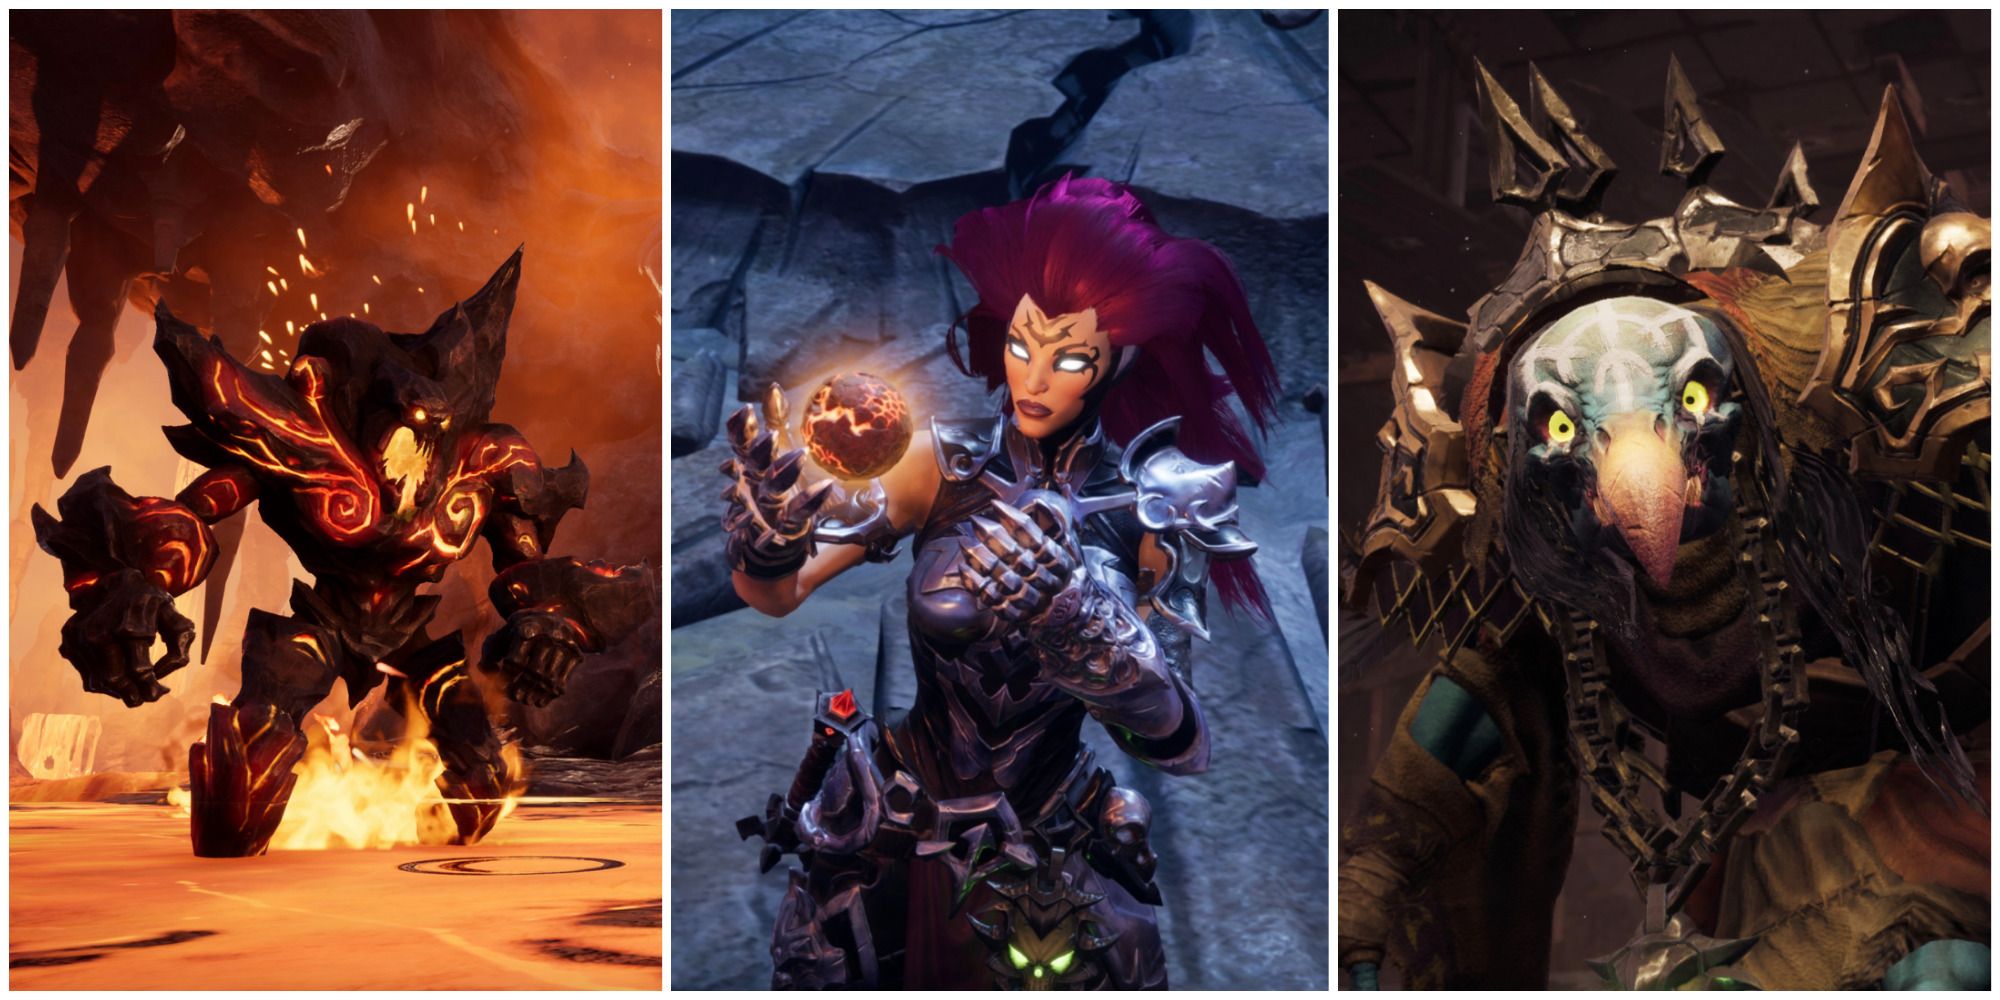 Darksiders 3: Every Boss Fight, Ranked